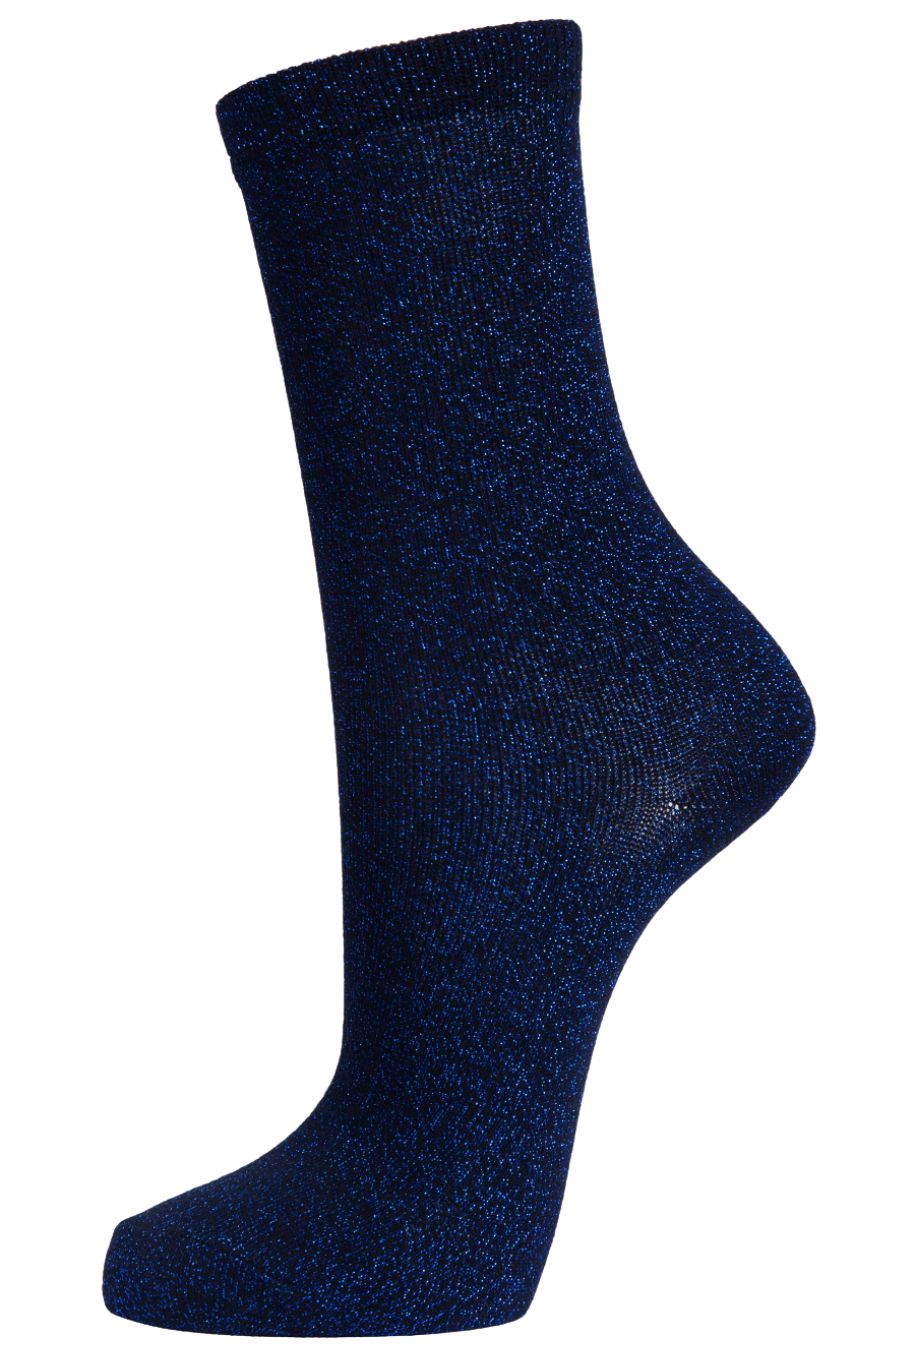 black ankle socks with all over royal blue glitter effect